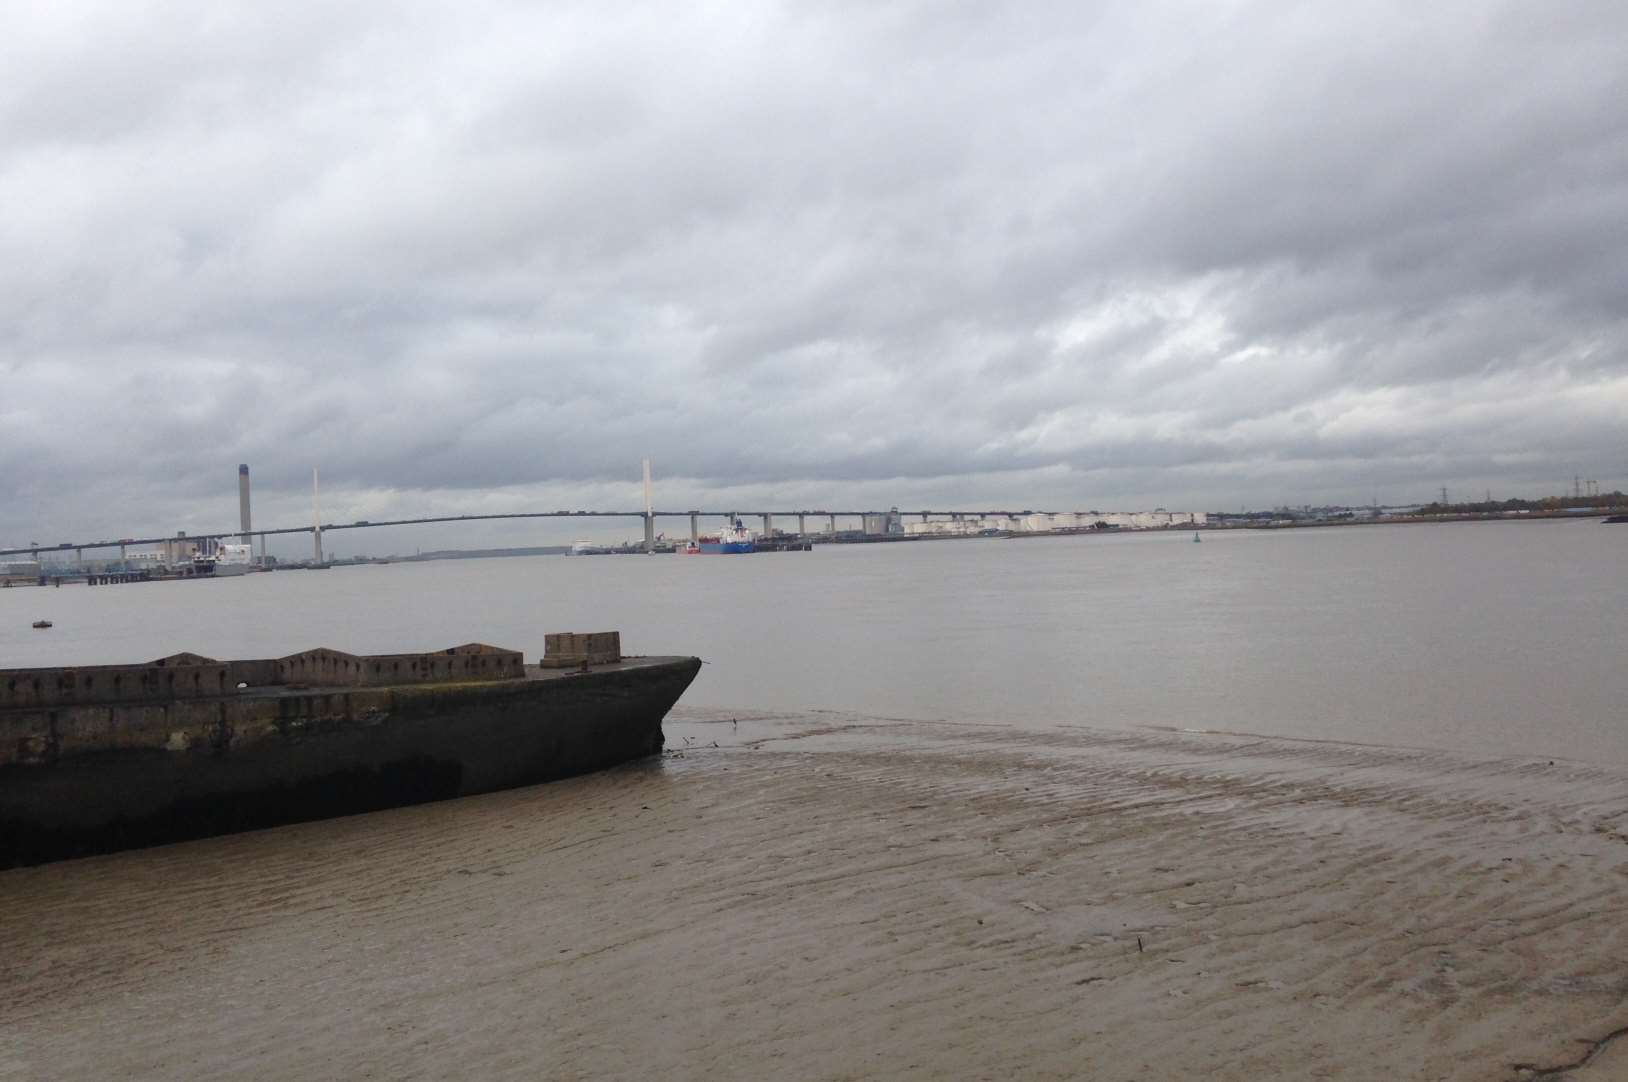 The body was pulled out of the Thames, overlooking the QEII bridge